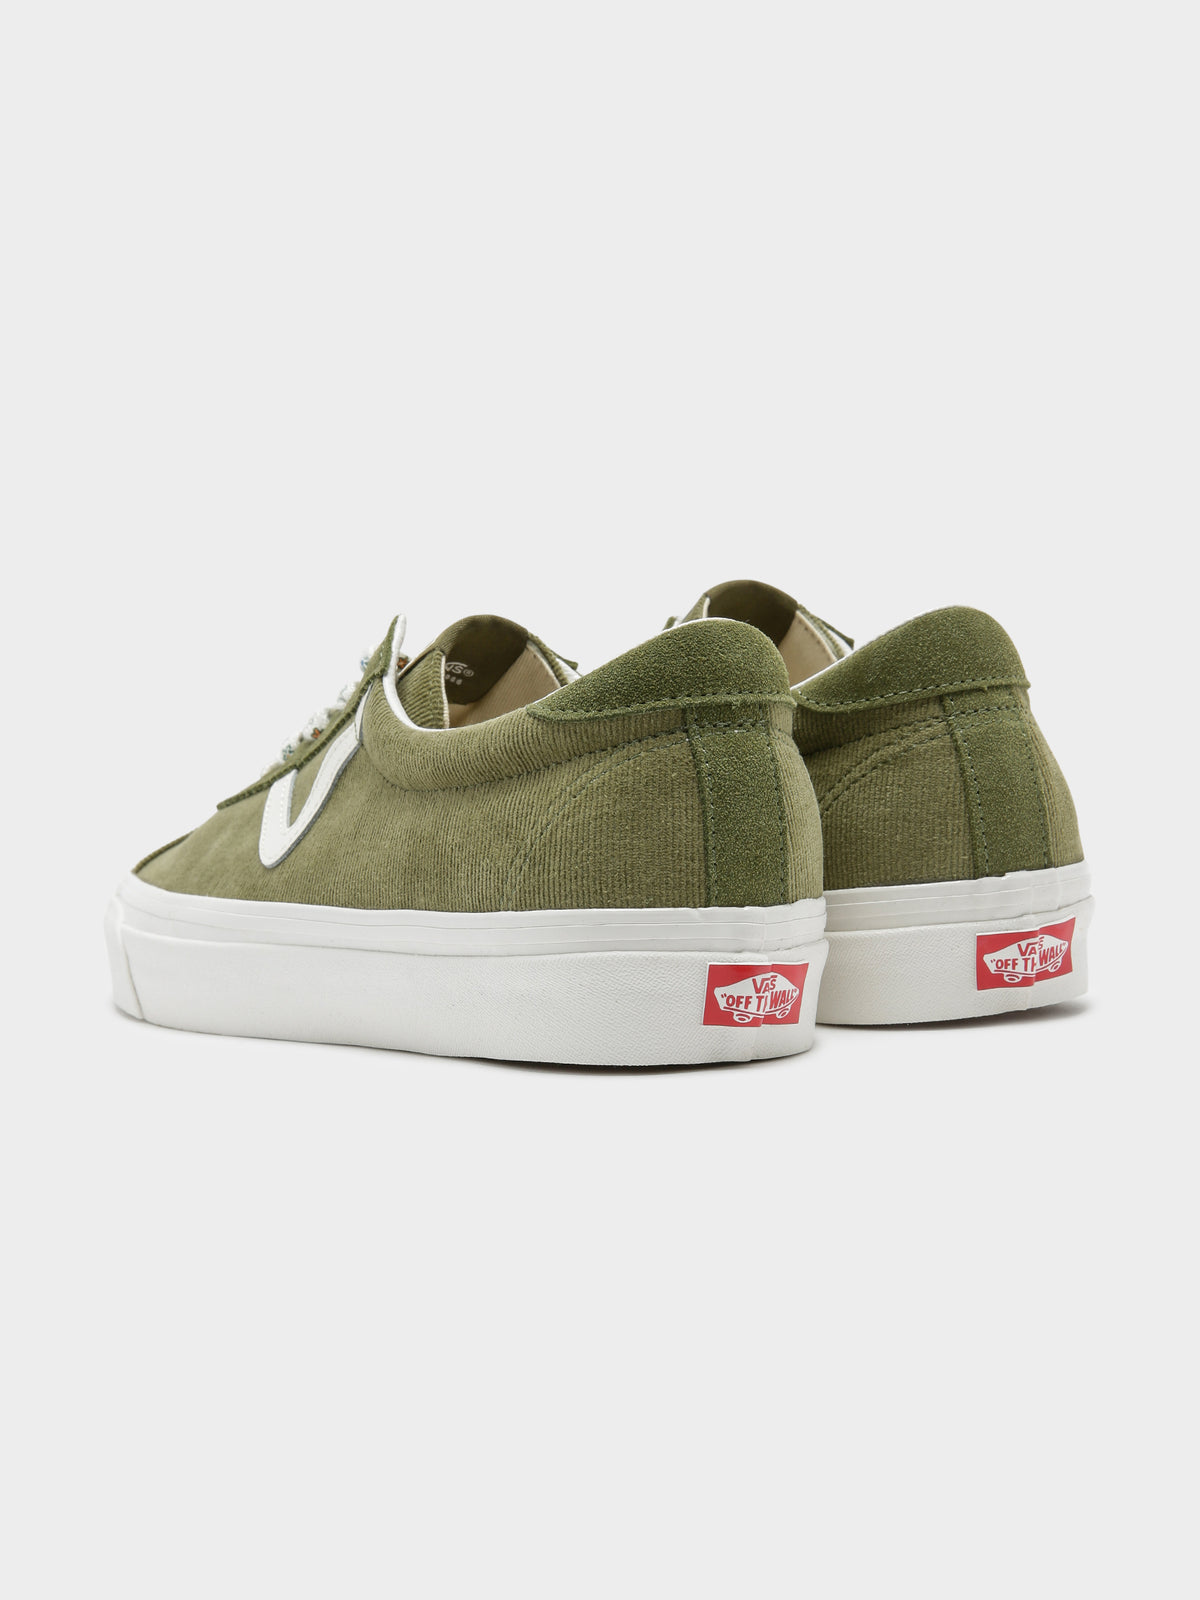 Unisex Style 73 DX Anaheim Sneakers in Green